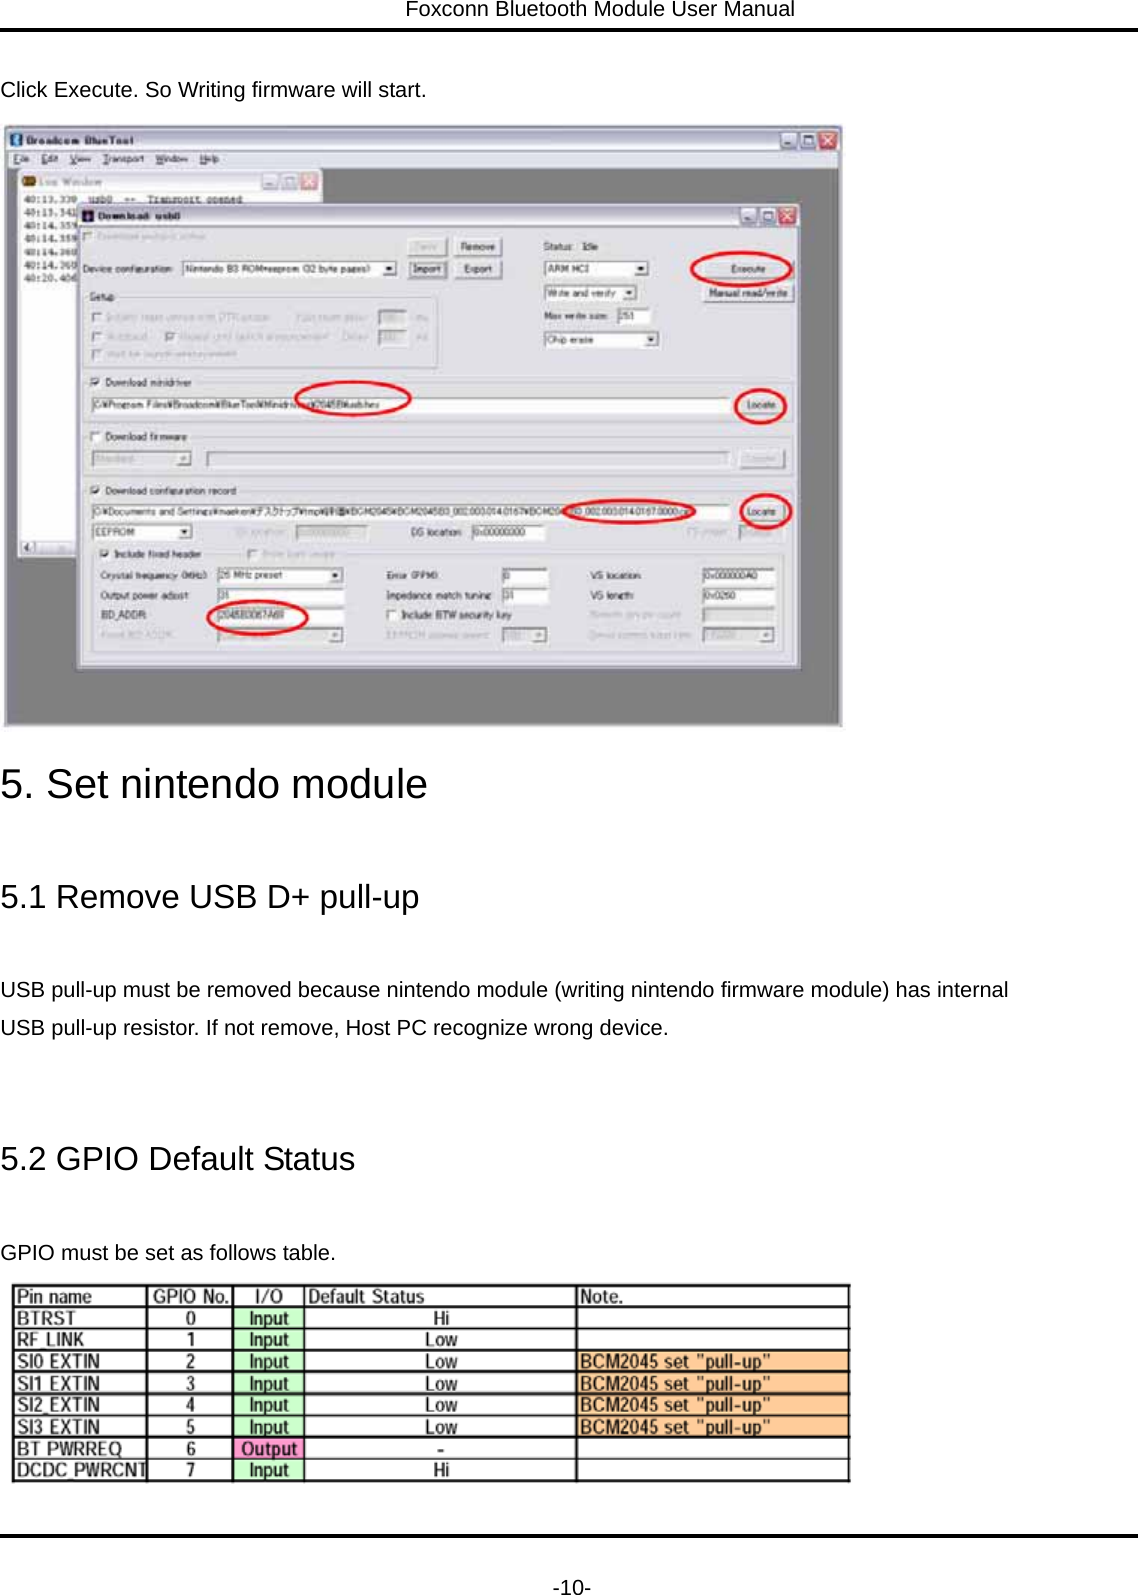 Foxconn Bluetooth Module User Manual   -10- Click Execute. So Writing firmware will start.  5. Set nintendo module  5.1 Remove USB D+ pull-up  USB pull-up must be removed because nintendo module (writing nintendo firmware module) has internal   USB pull-up resistor. If not remove, Host PC recognize wrong device.  5.2 GPIO Default Status  GPIO must be set as follows table.  